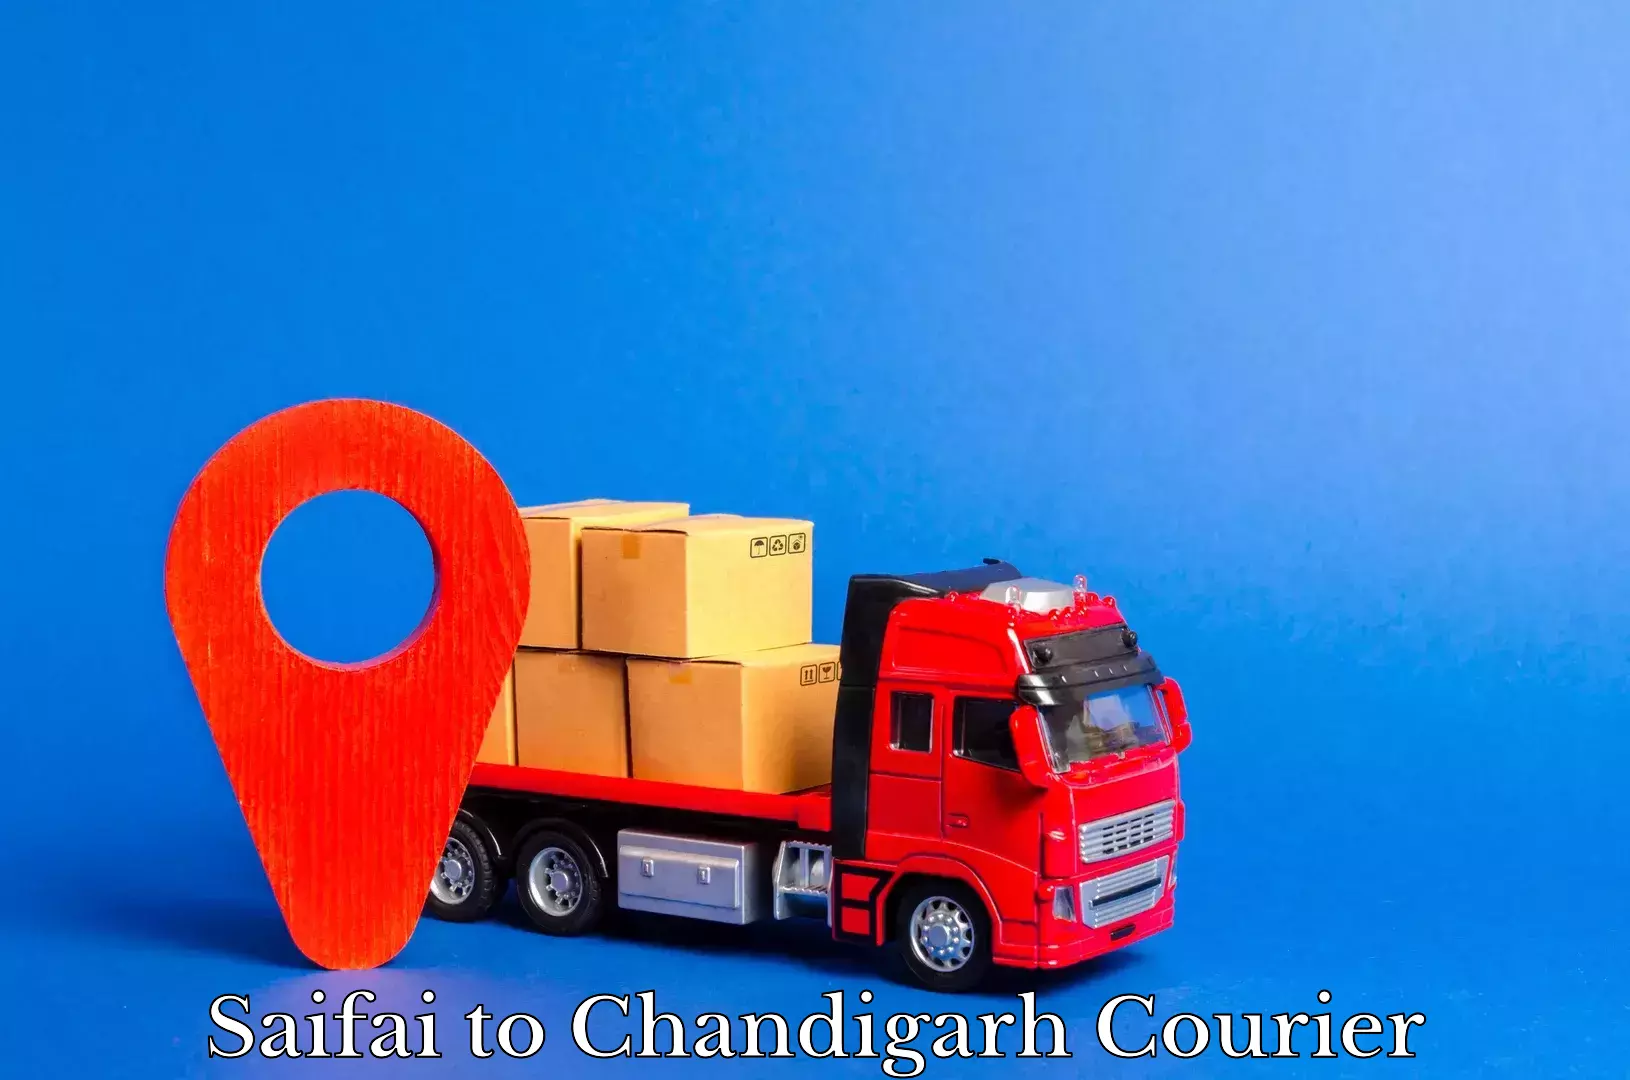 Express delivery capabilities Saifai to Chandigarh